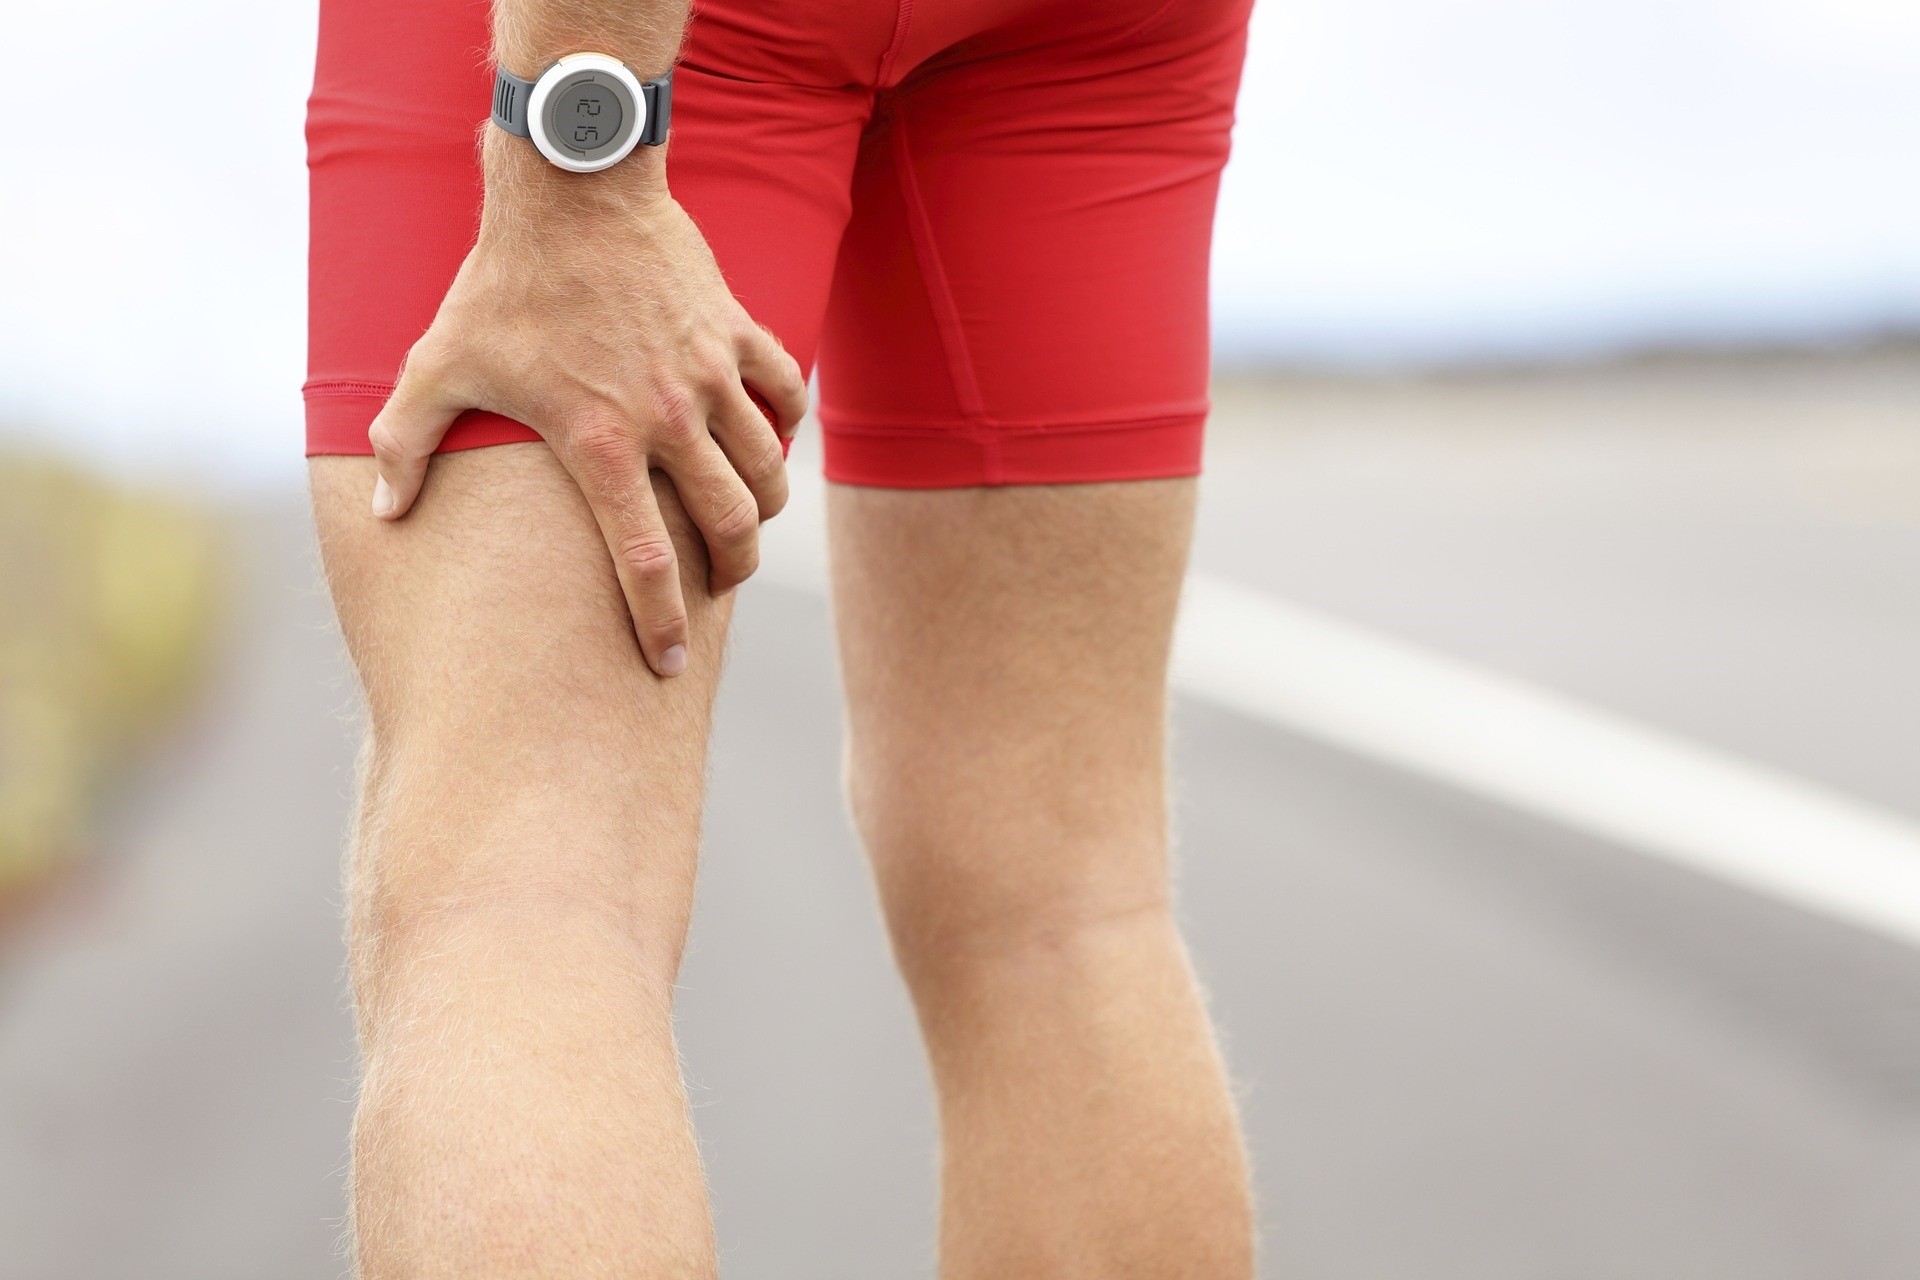 Hamstring Injuries, Hamstring Causes And Treatment, RMT Hamstring Injury, Hamstring RMT Treatment, Hamstring Massage Therapy, Hamstring RMT Vaughan Ontario Massage,